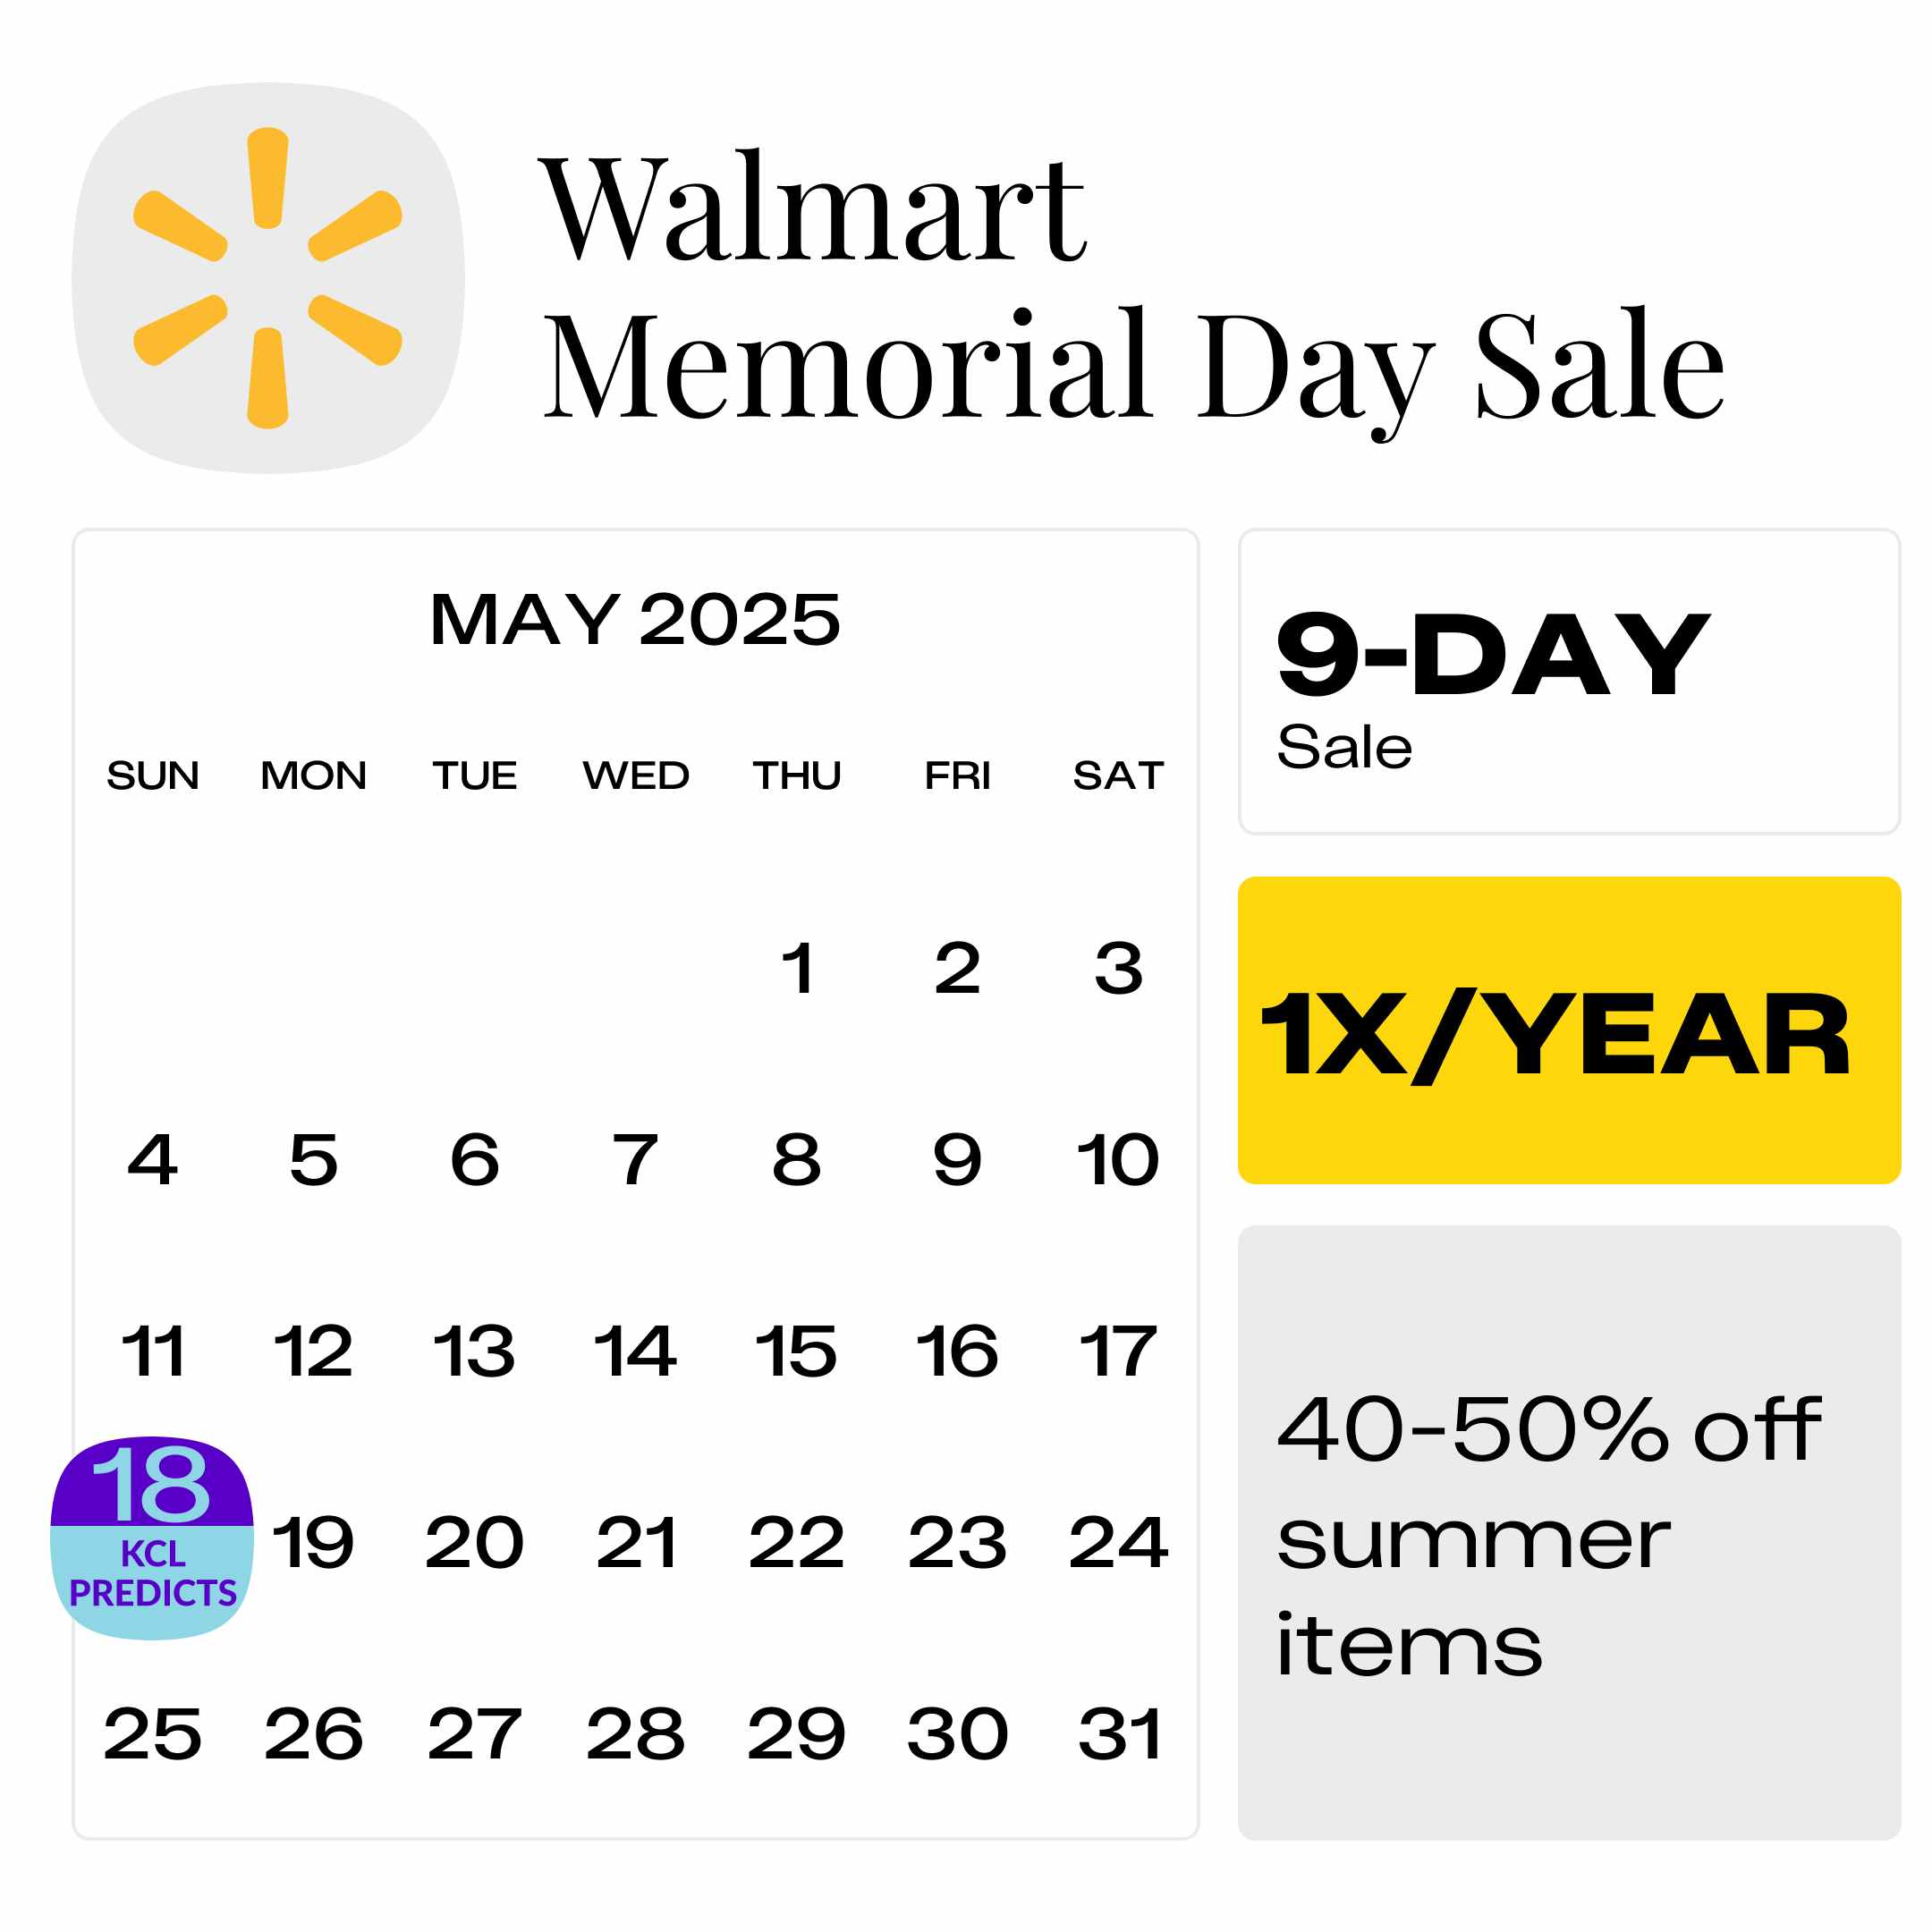 Predicted start date for the Walmart Memorial Day Sale on May 18, 2025.